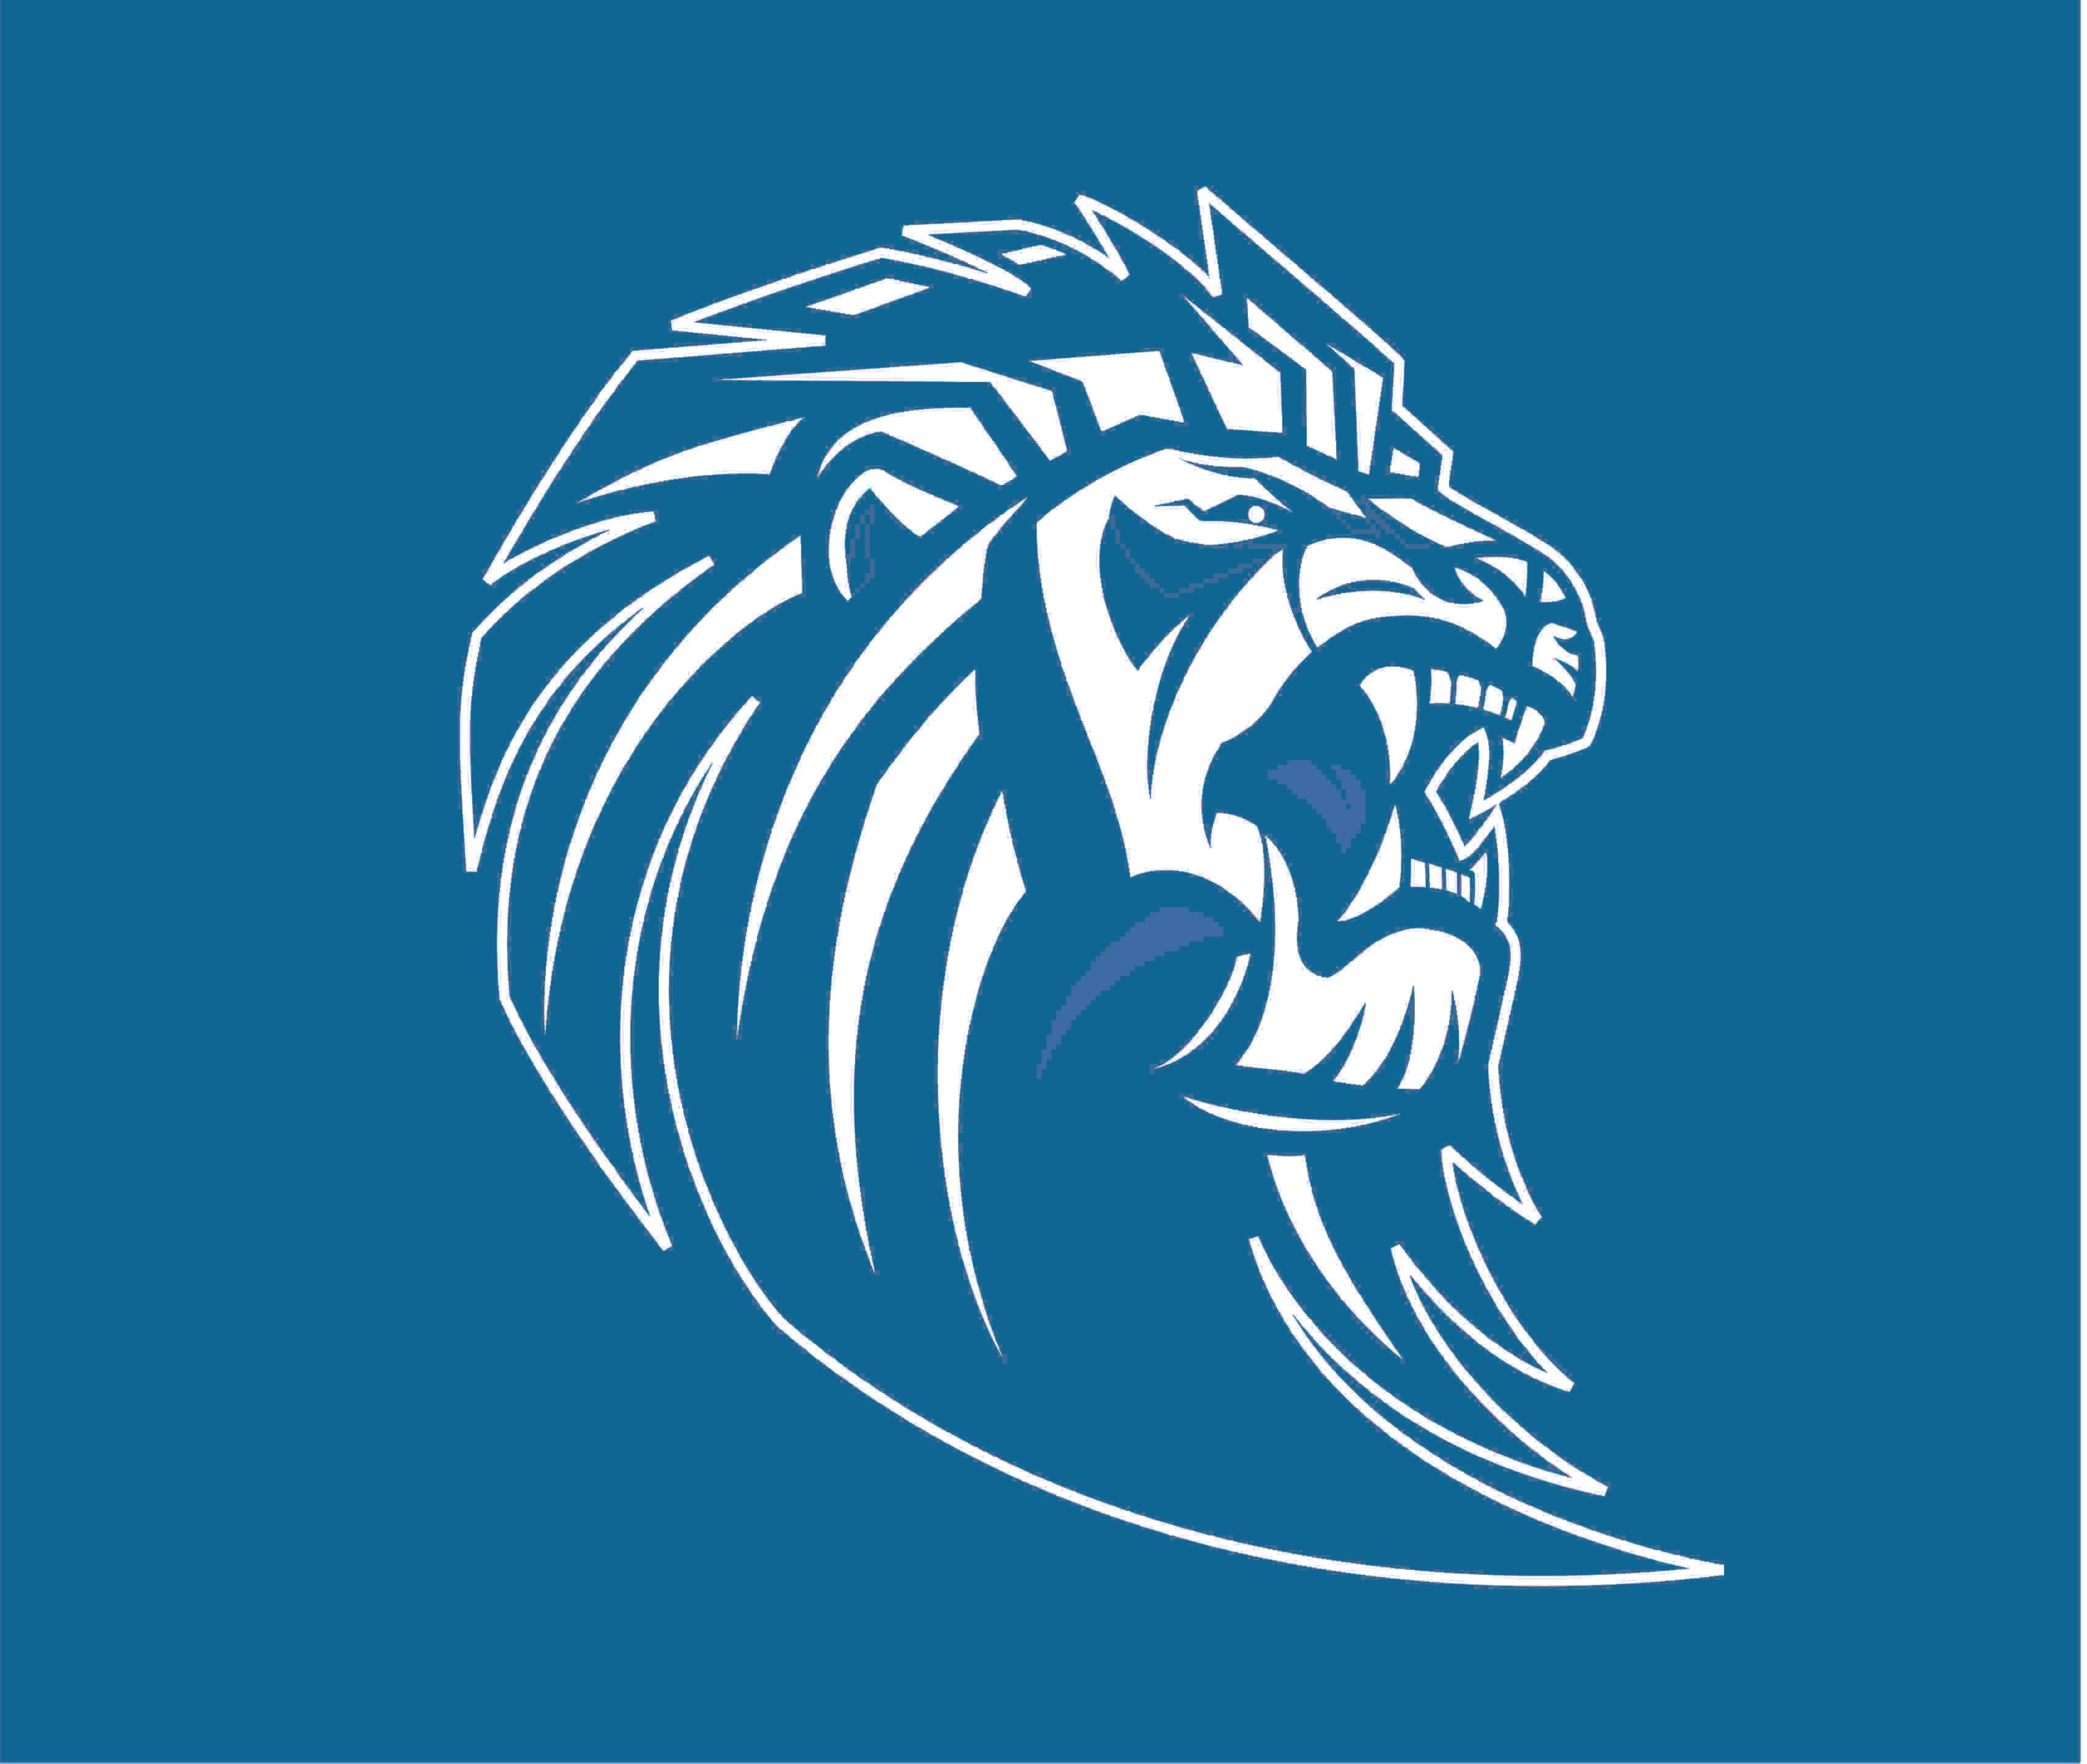 Different variations of the school's logo Blue background with white lion.